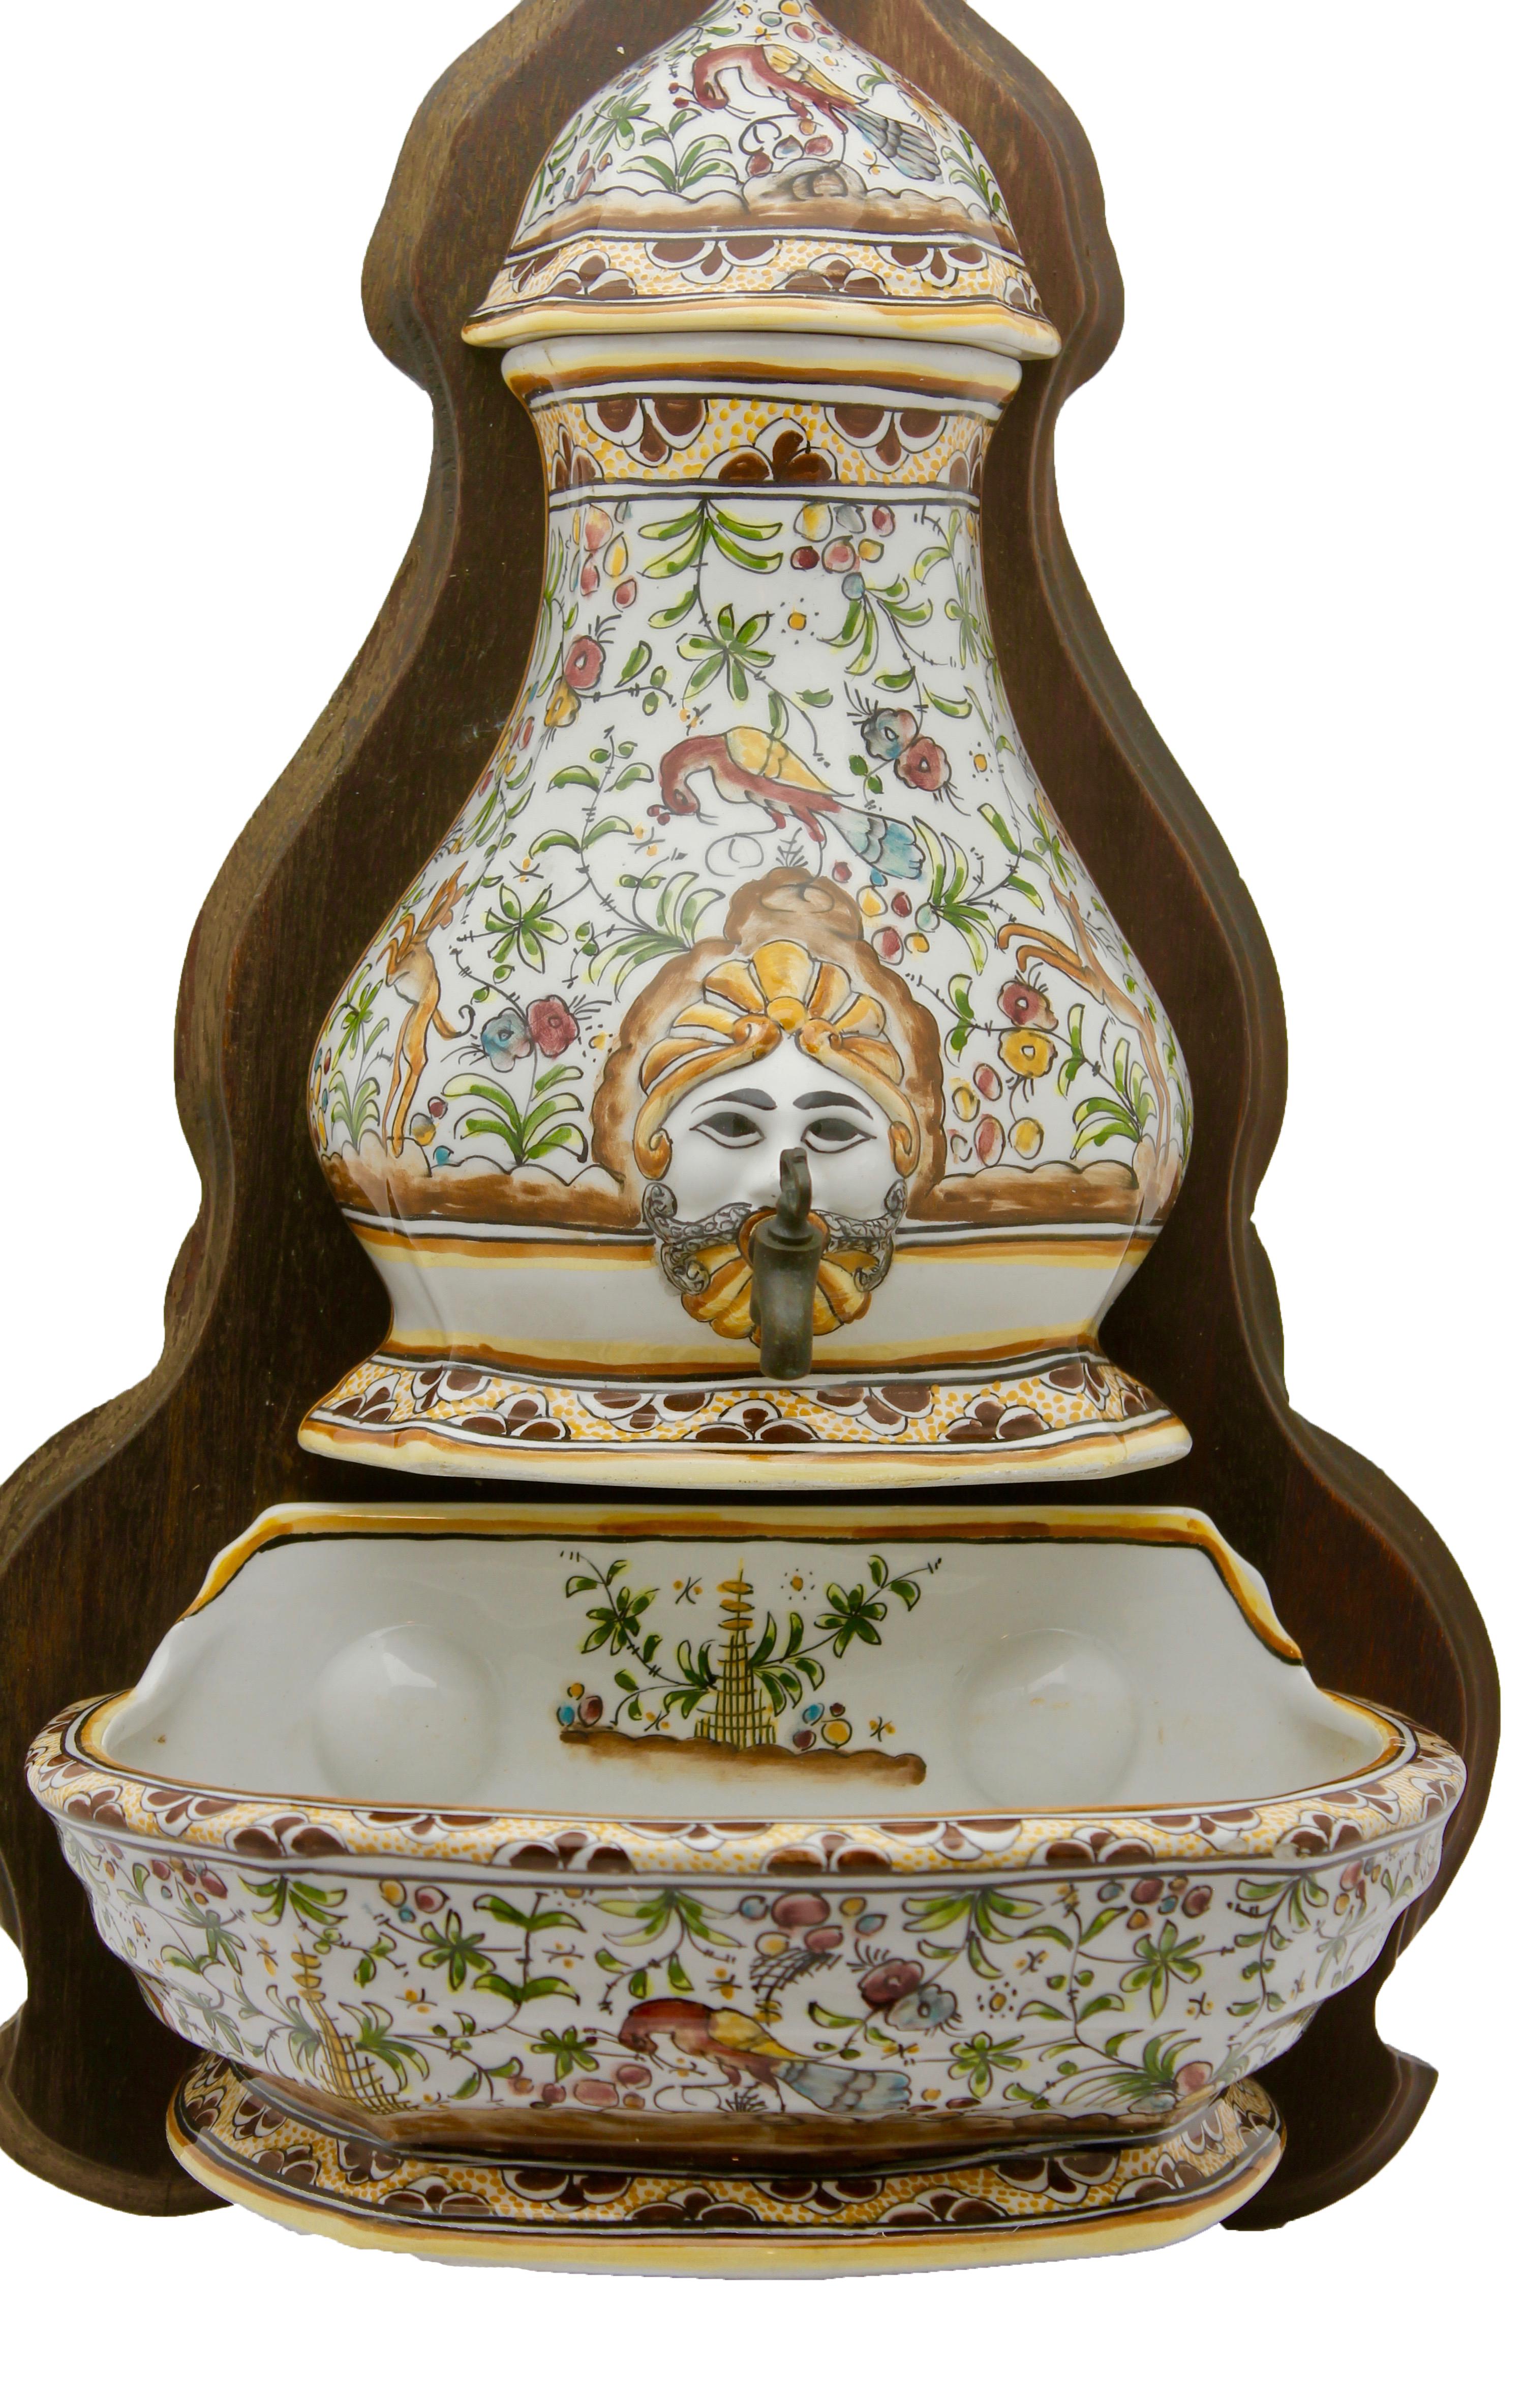 Glazed Colorful Portuguese Cistern/Humidifier with 17th Century Flowers & Masque Decor For Sale